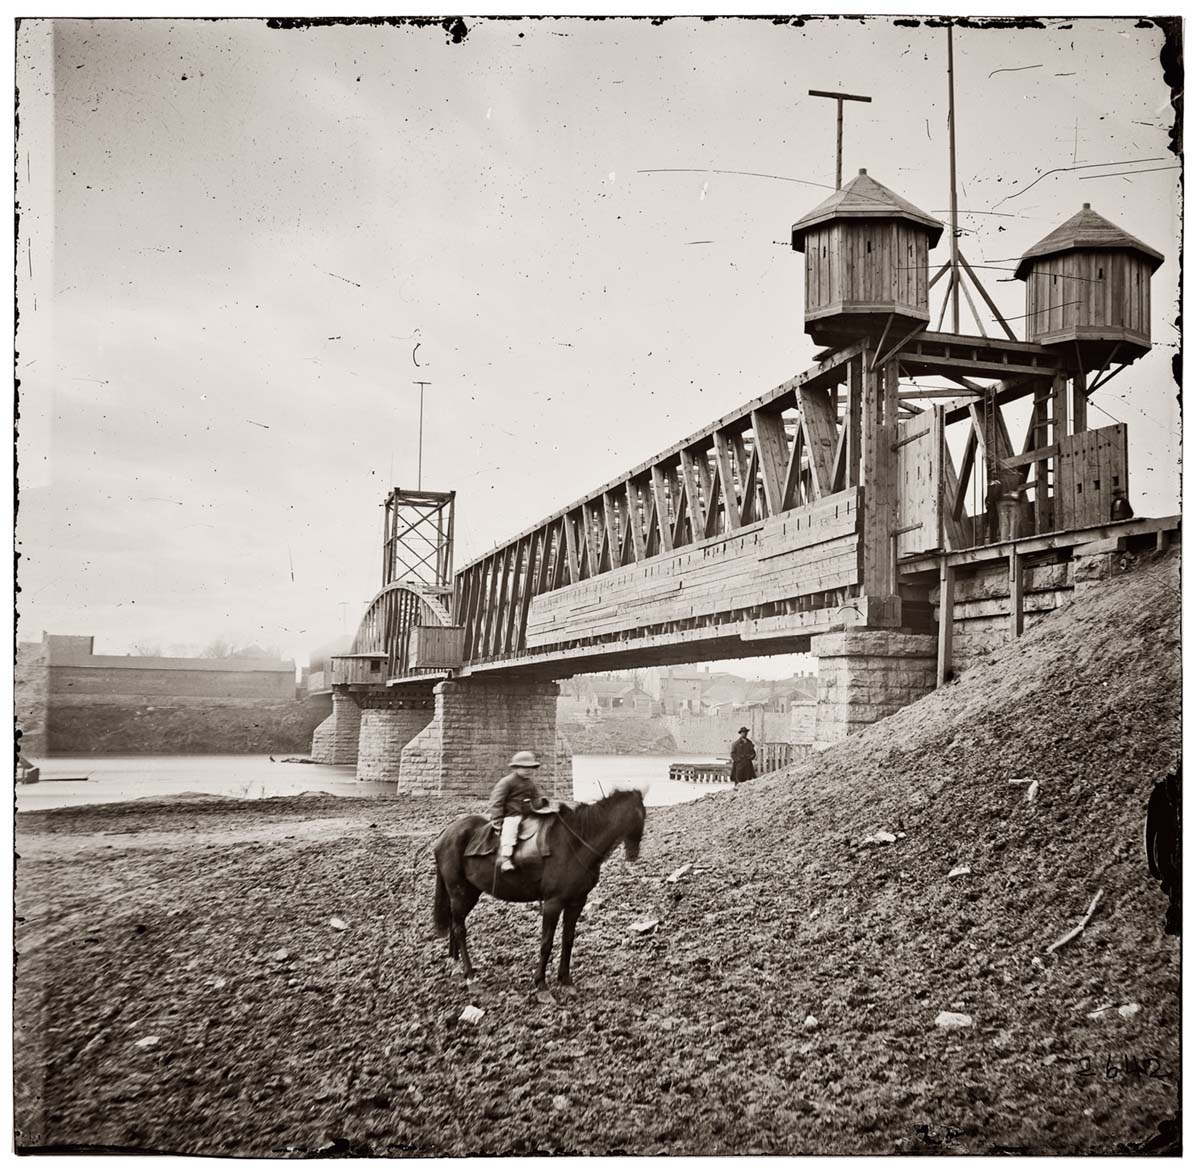 Nashville, Tennessee. Fortified railroad bridge across the Cumberland River, 1864